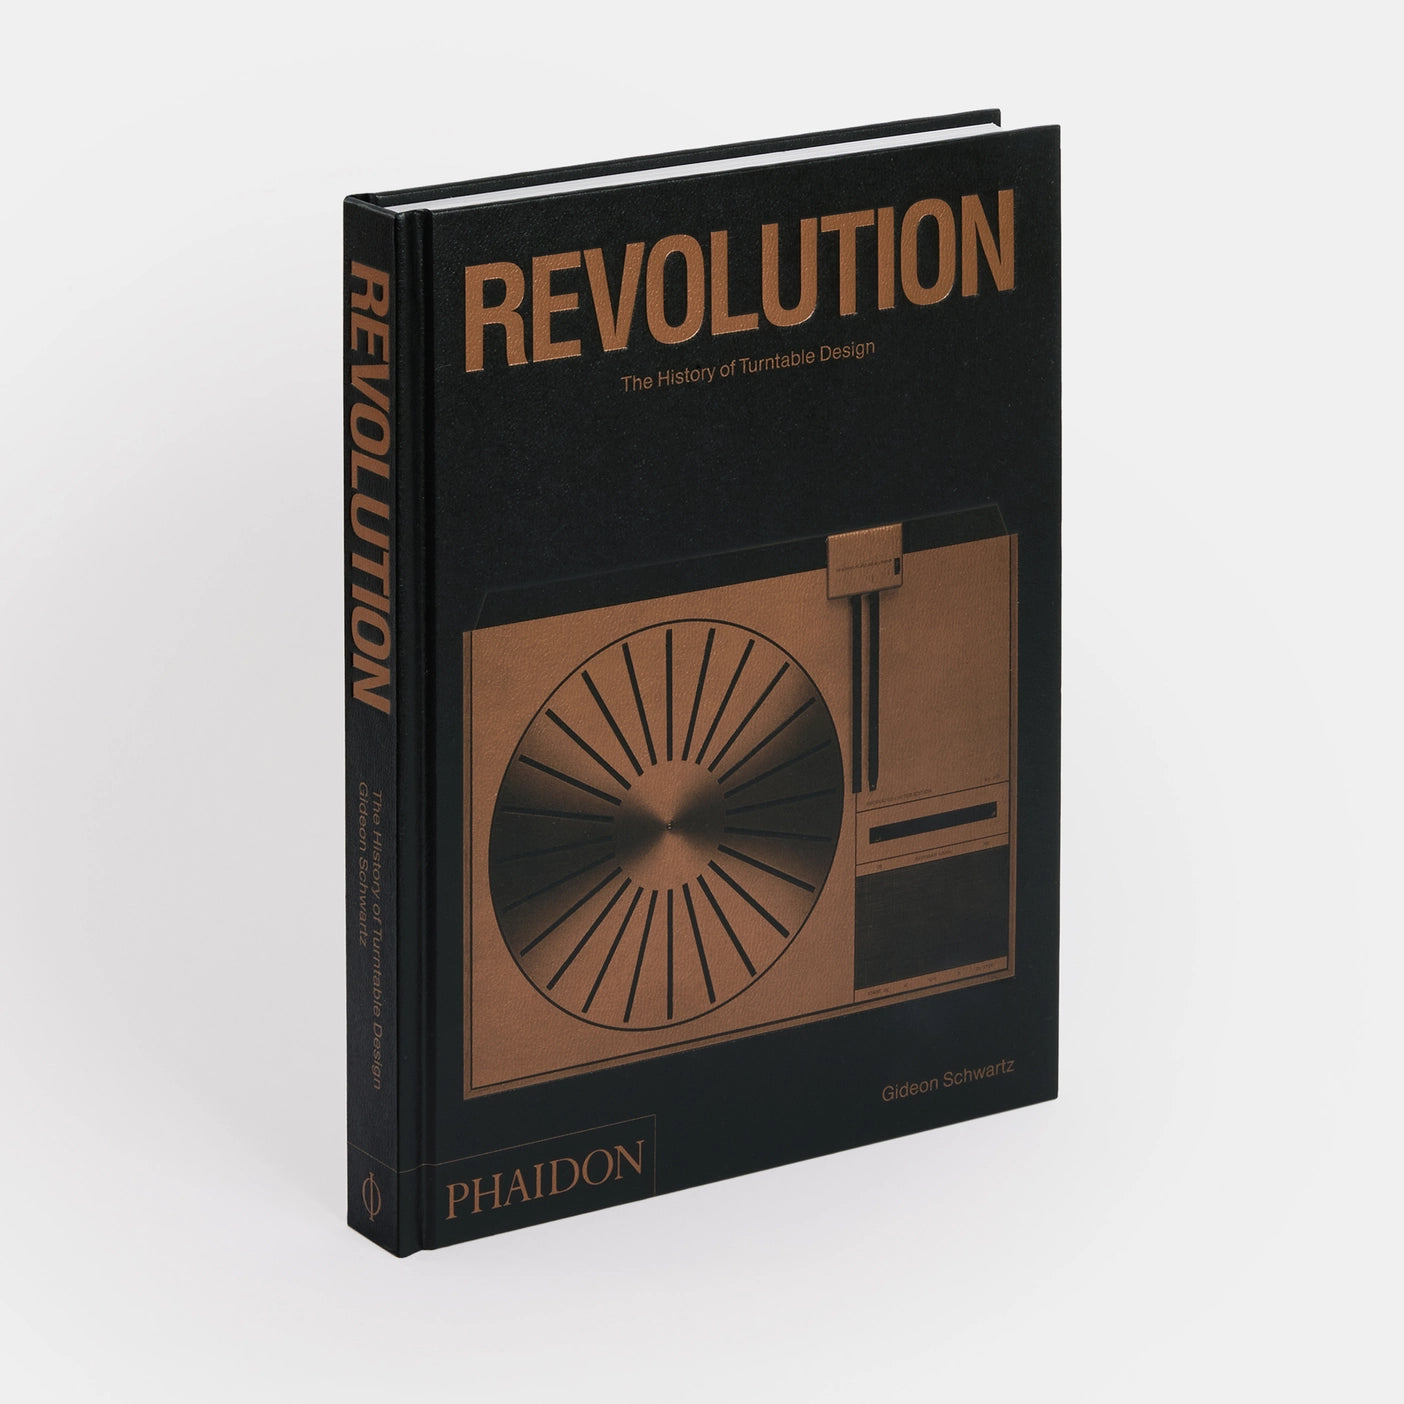 Revolution: The History of Turntable Design (pre-order)